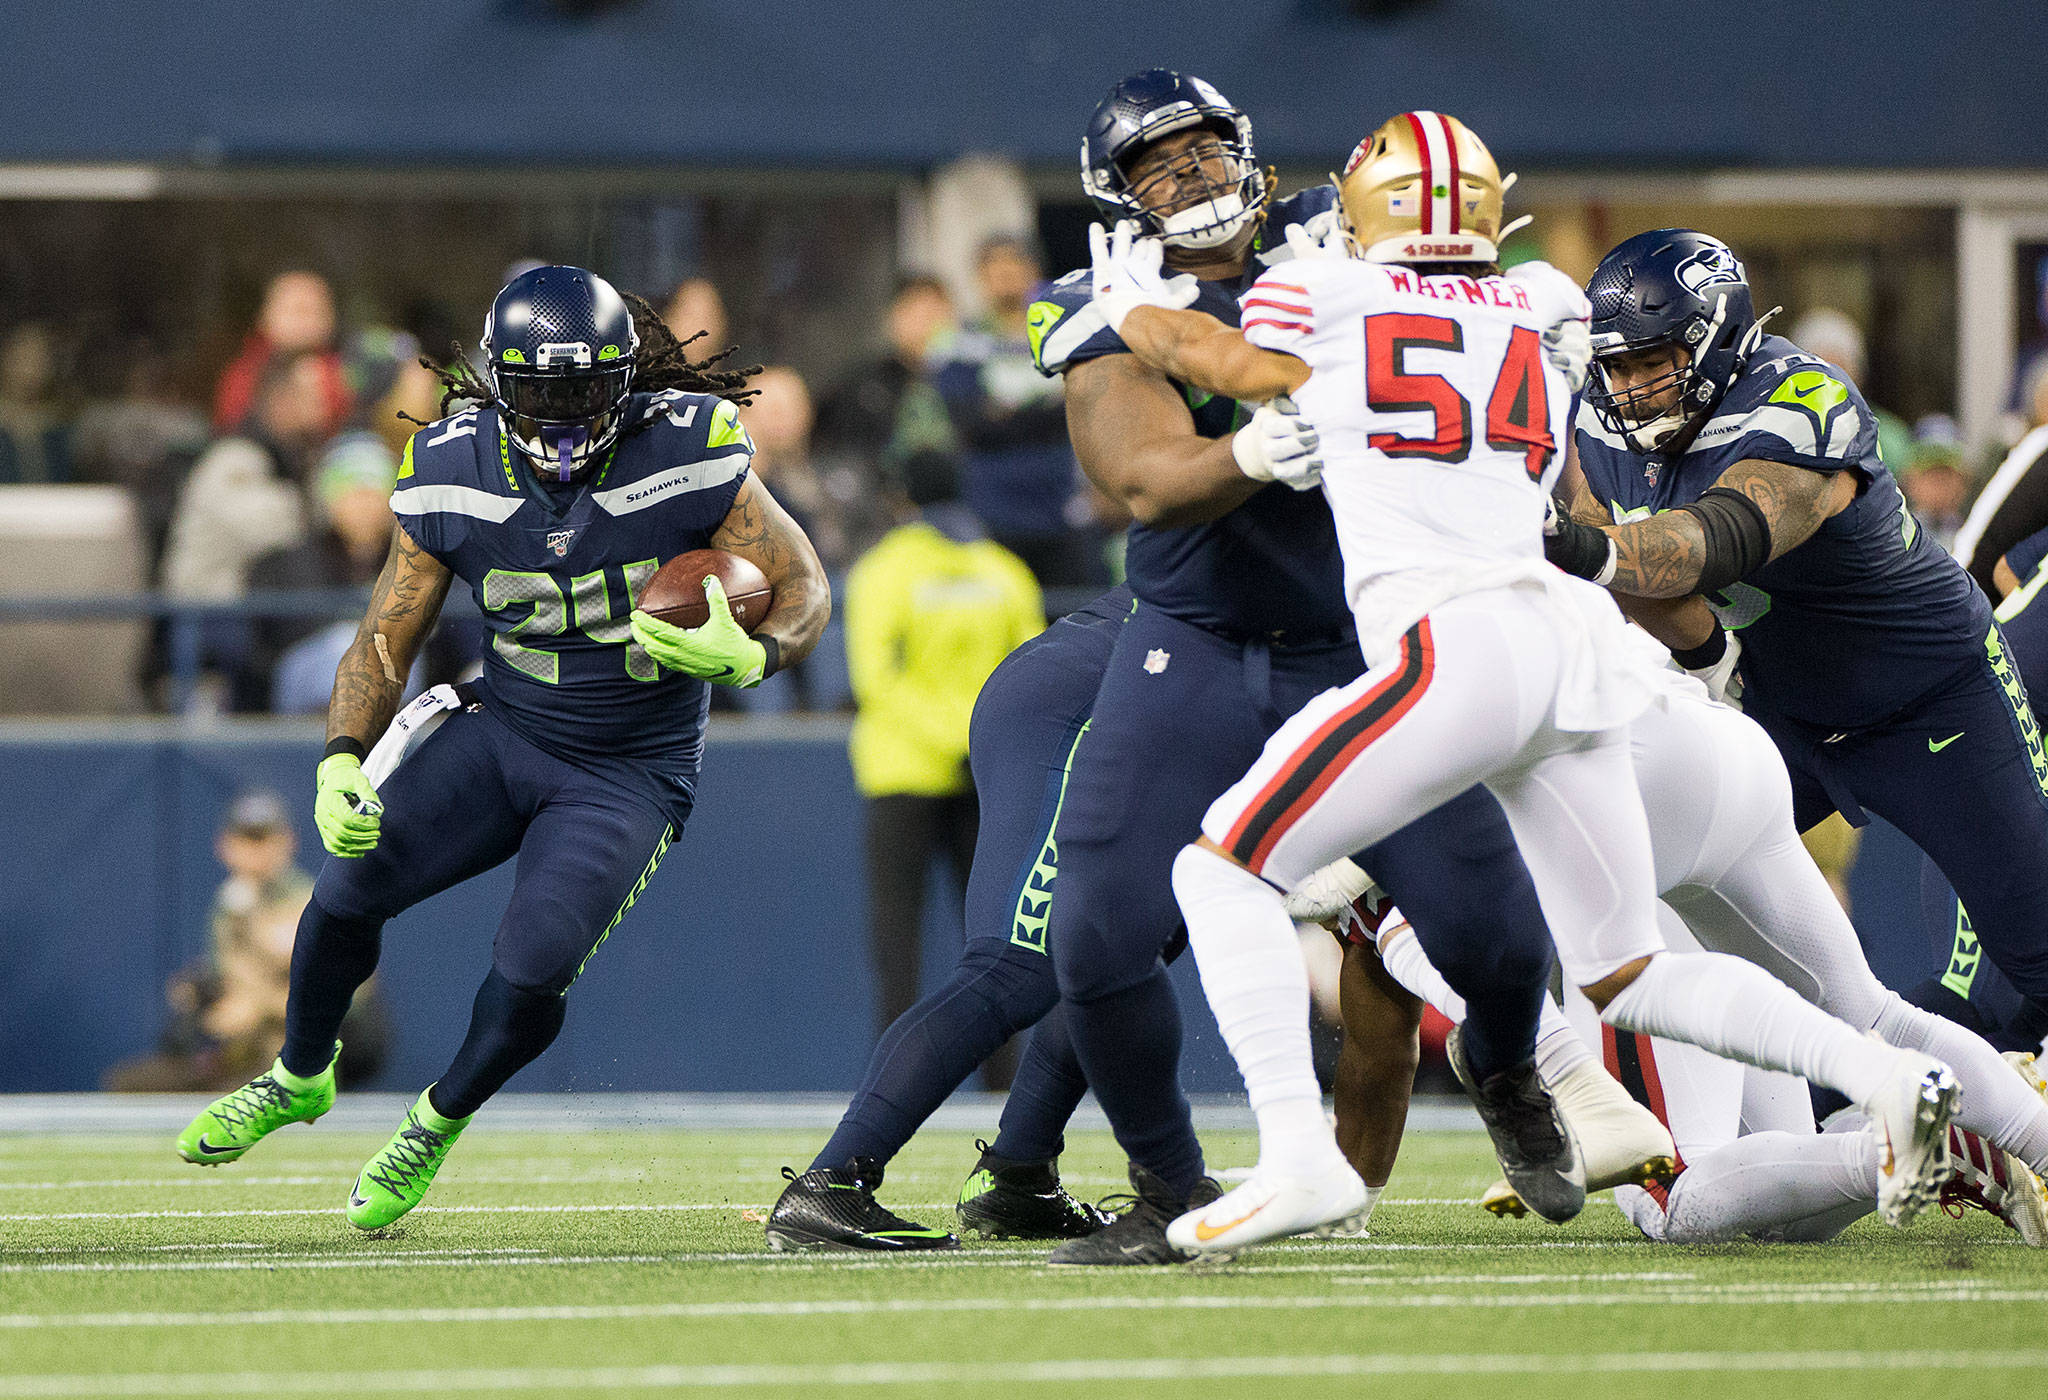 Seahawks fall an inch short of a division championship